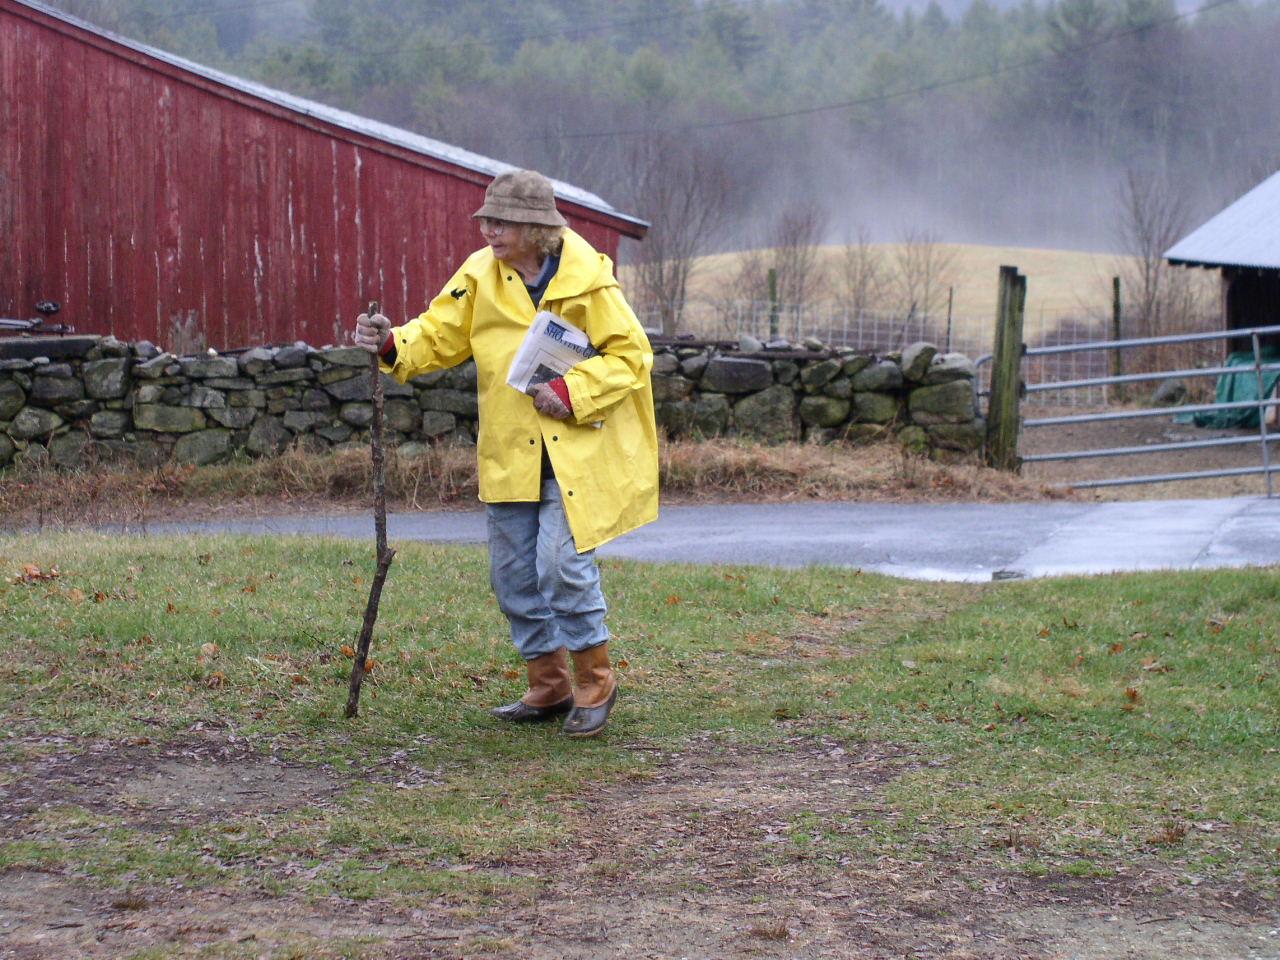 New England Farmer (user submitted)